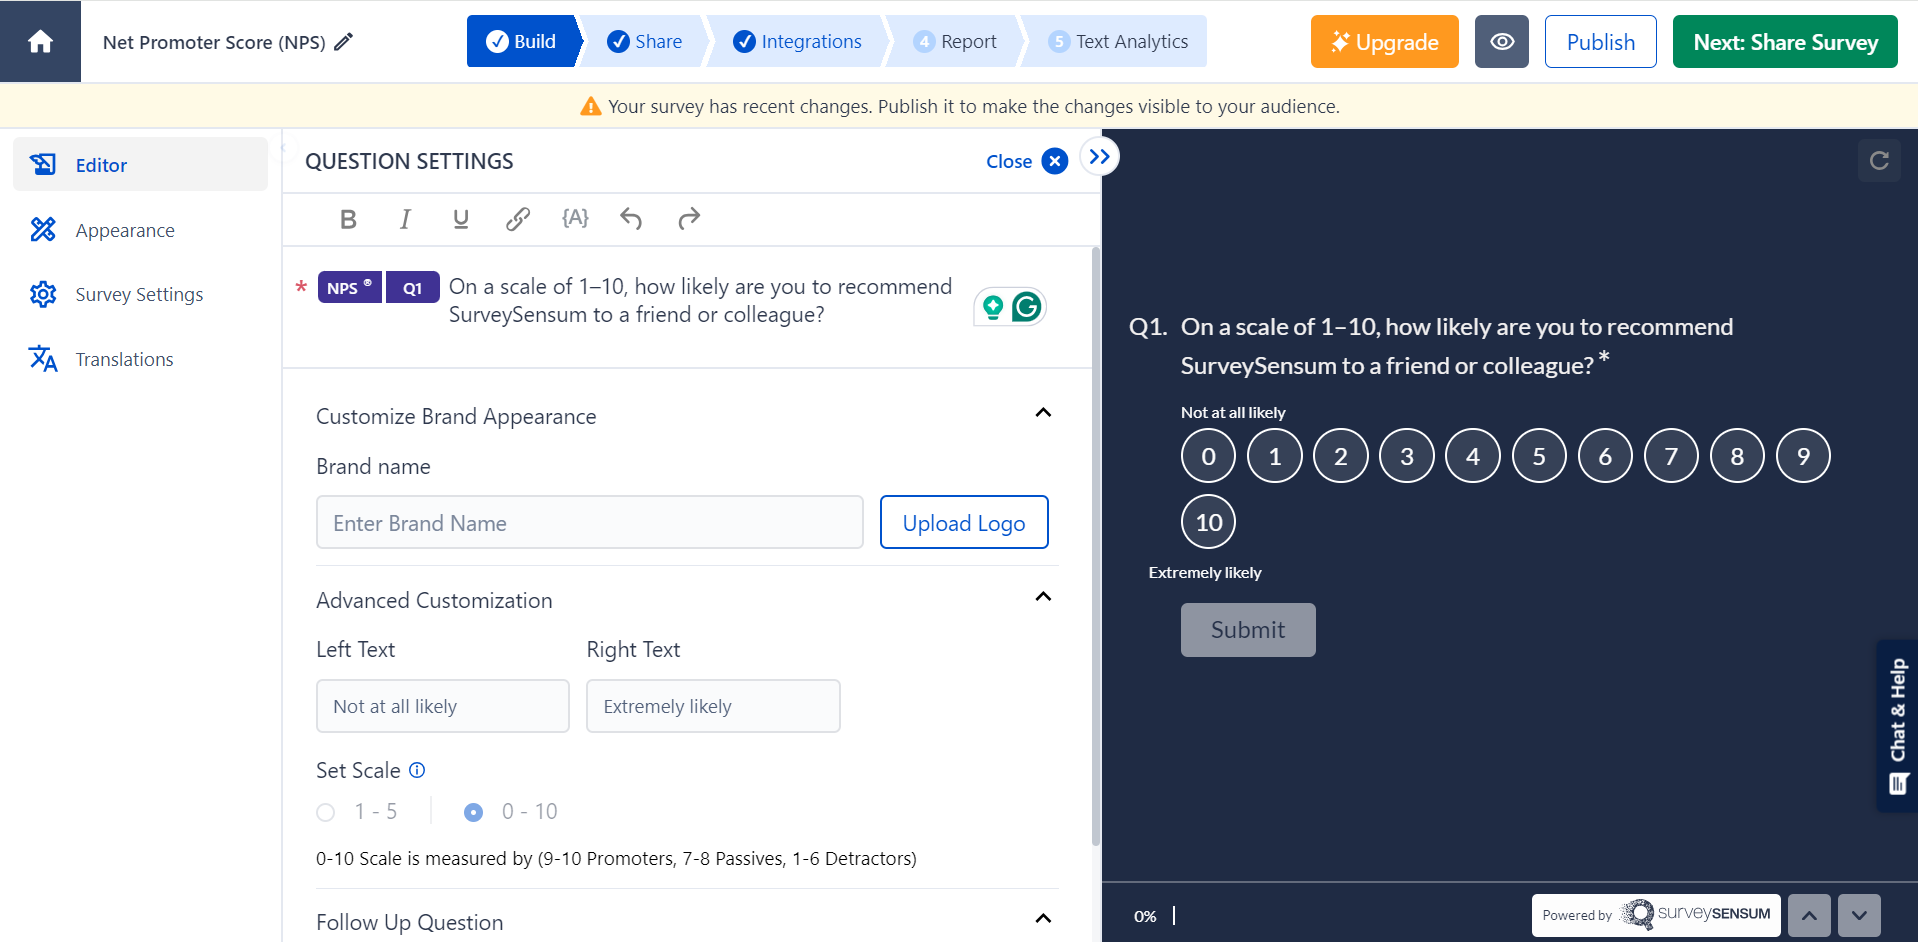  This is the image of the Quick Preview feature of SurveySensum where users can preview the changes they are making to surveys while working simultaneously on their surveys. 